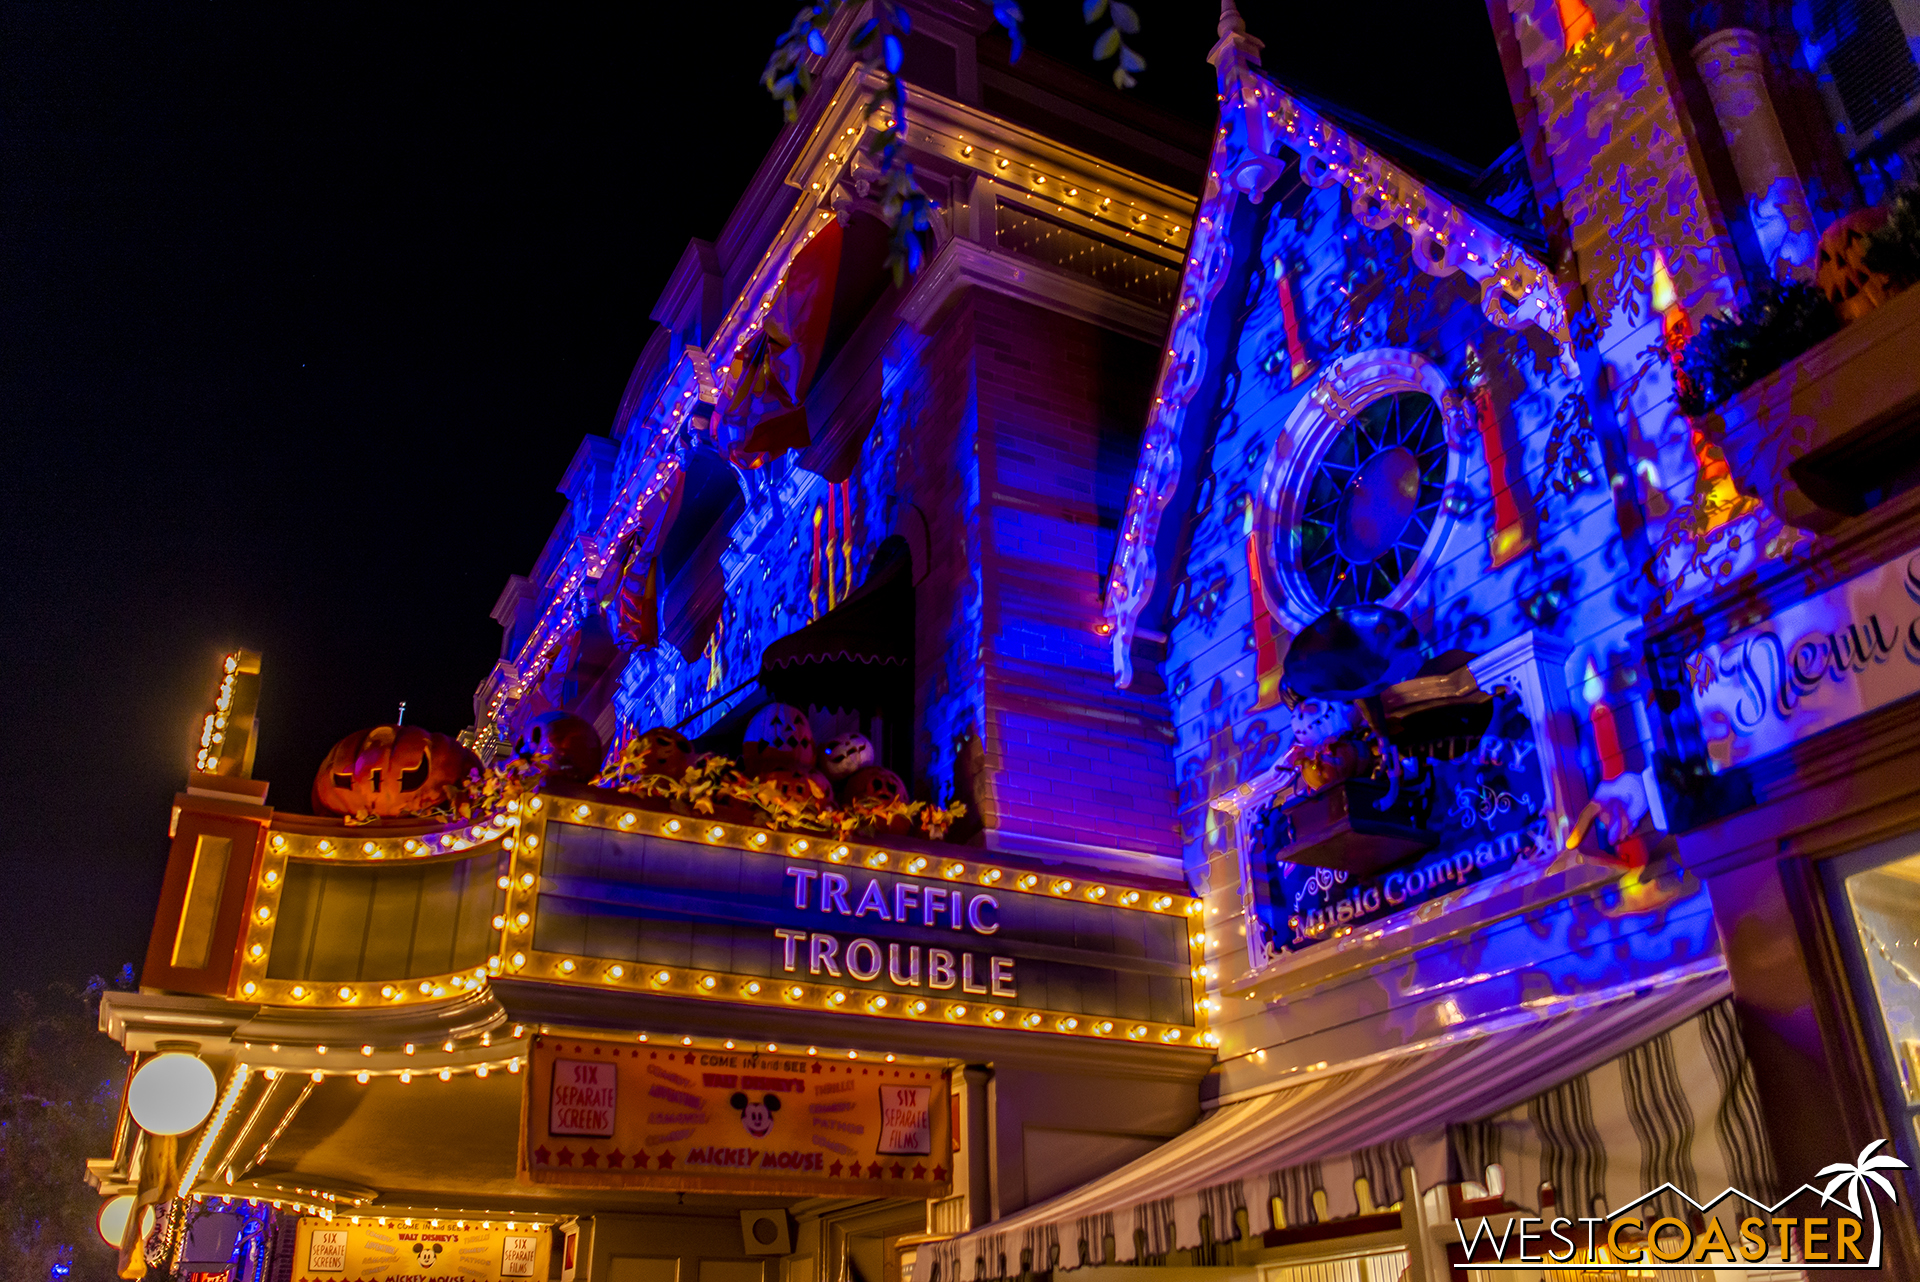  These are the legacy of the Main Street window projections used for the Disneyland Forever fireworks show. 